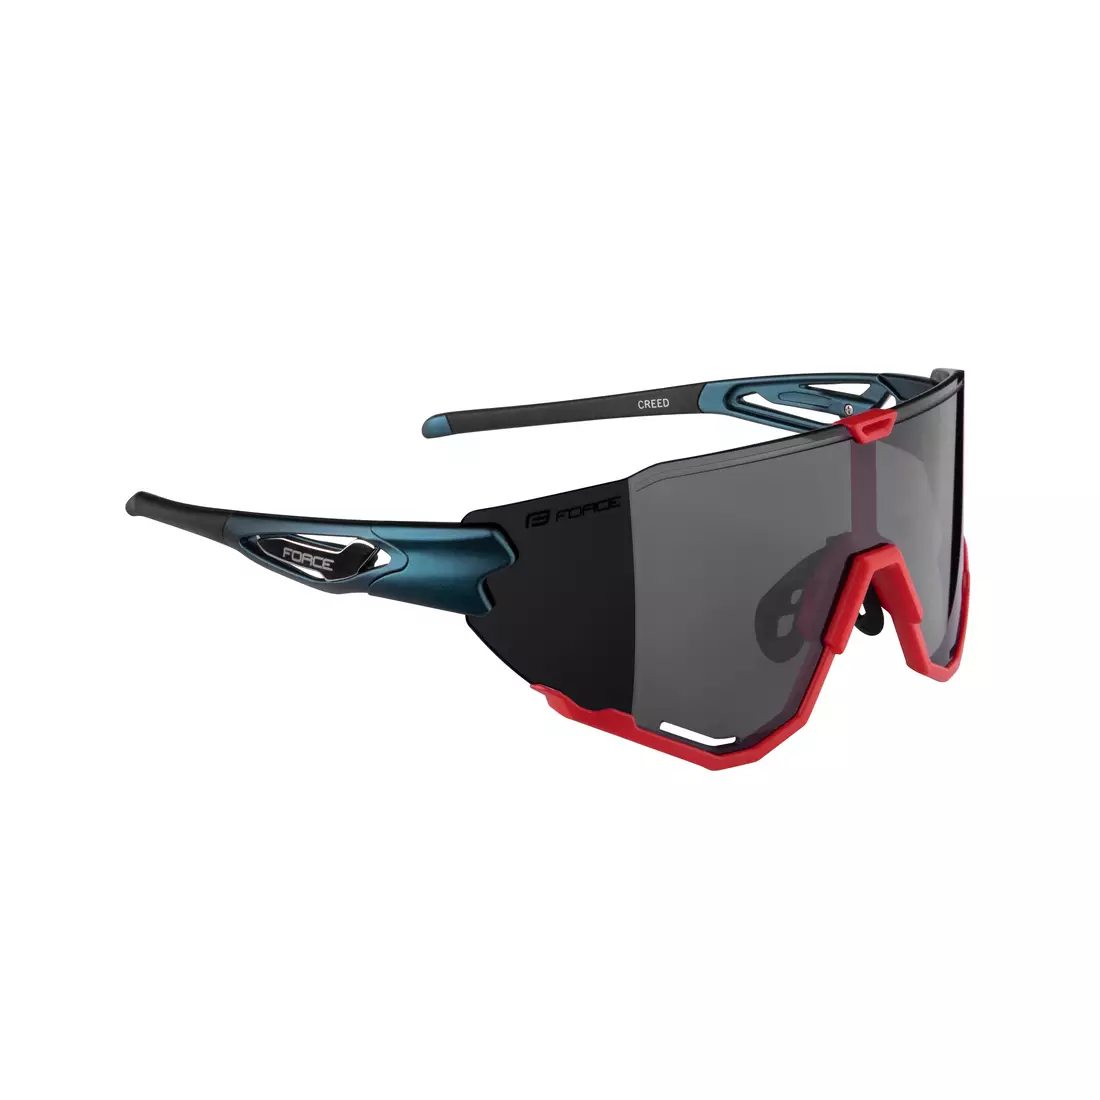 FORCE cycling / sports glasses CREED red-blue, 91179